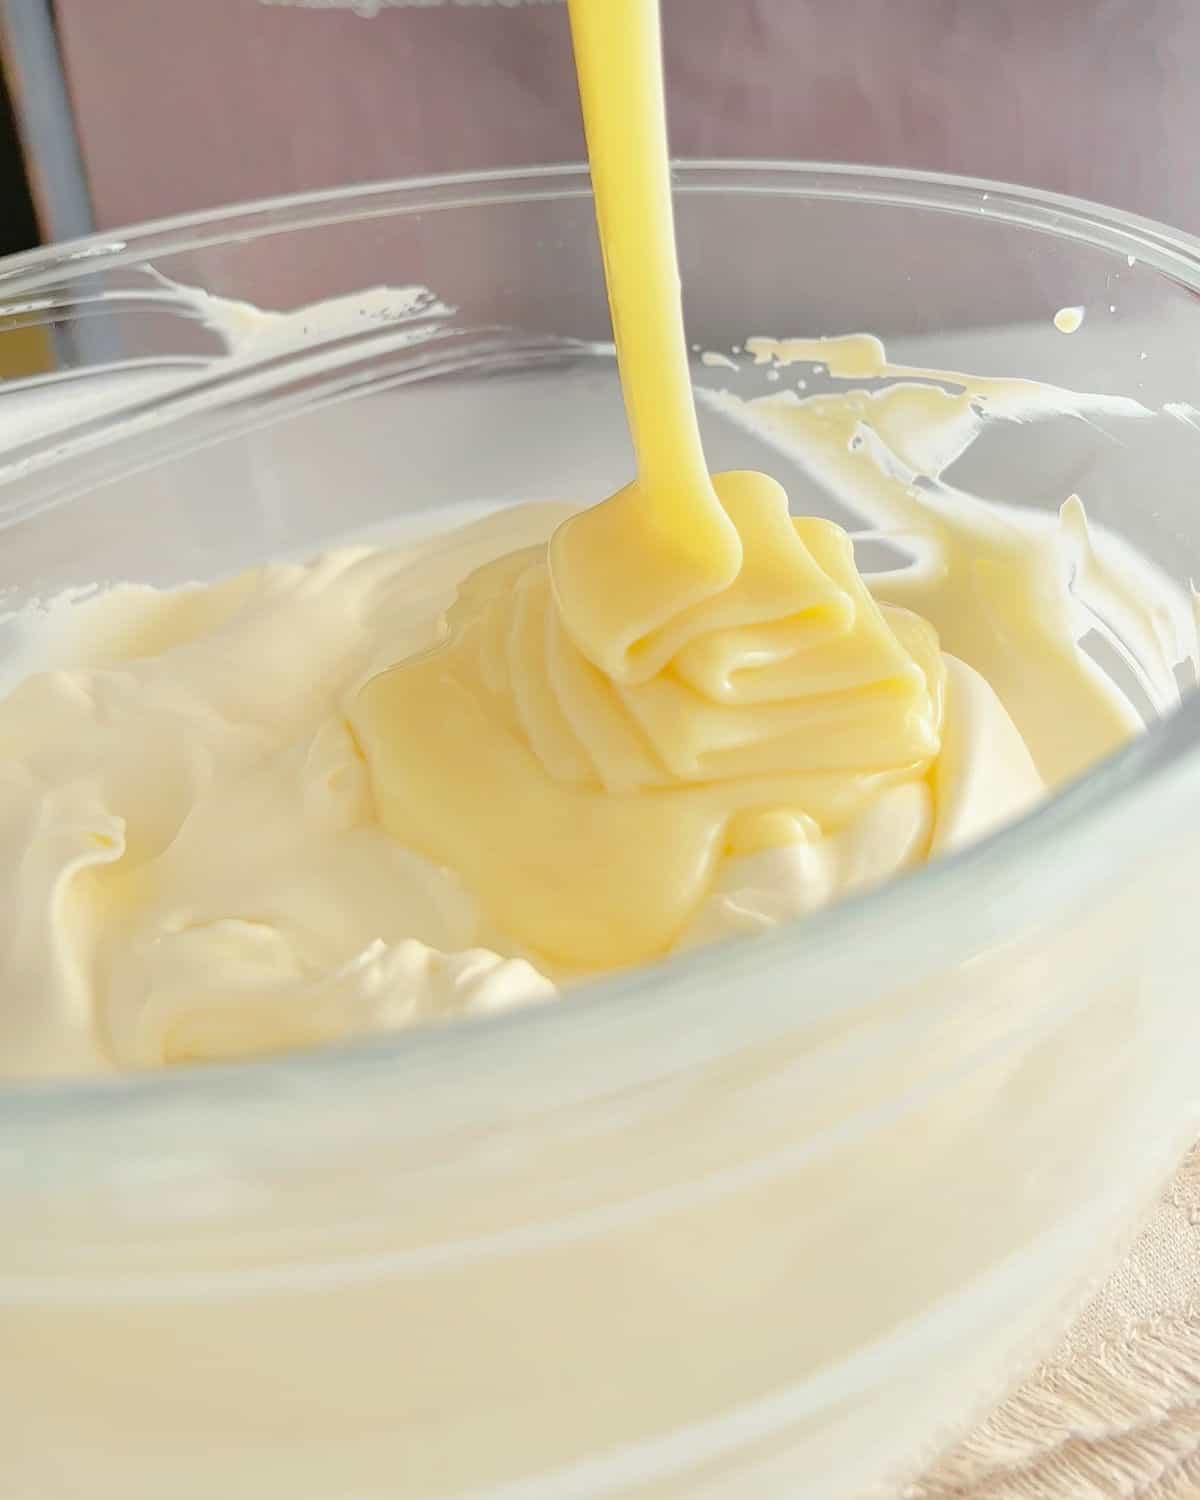 Pouring condensed milk on whipped cream in a glass bowl.